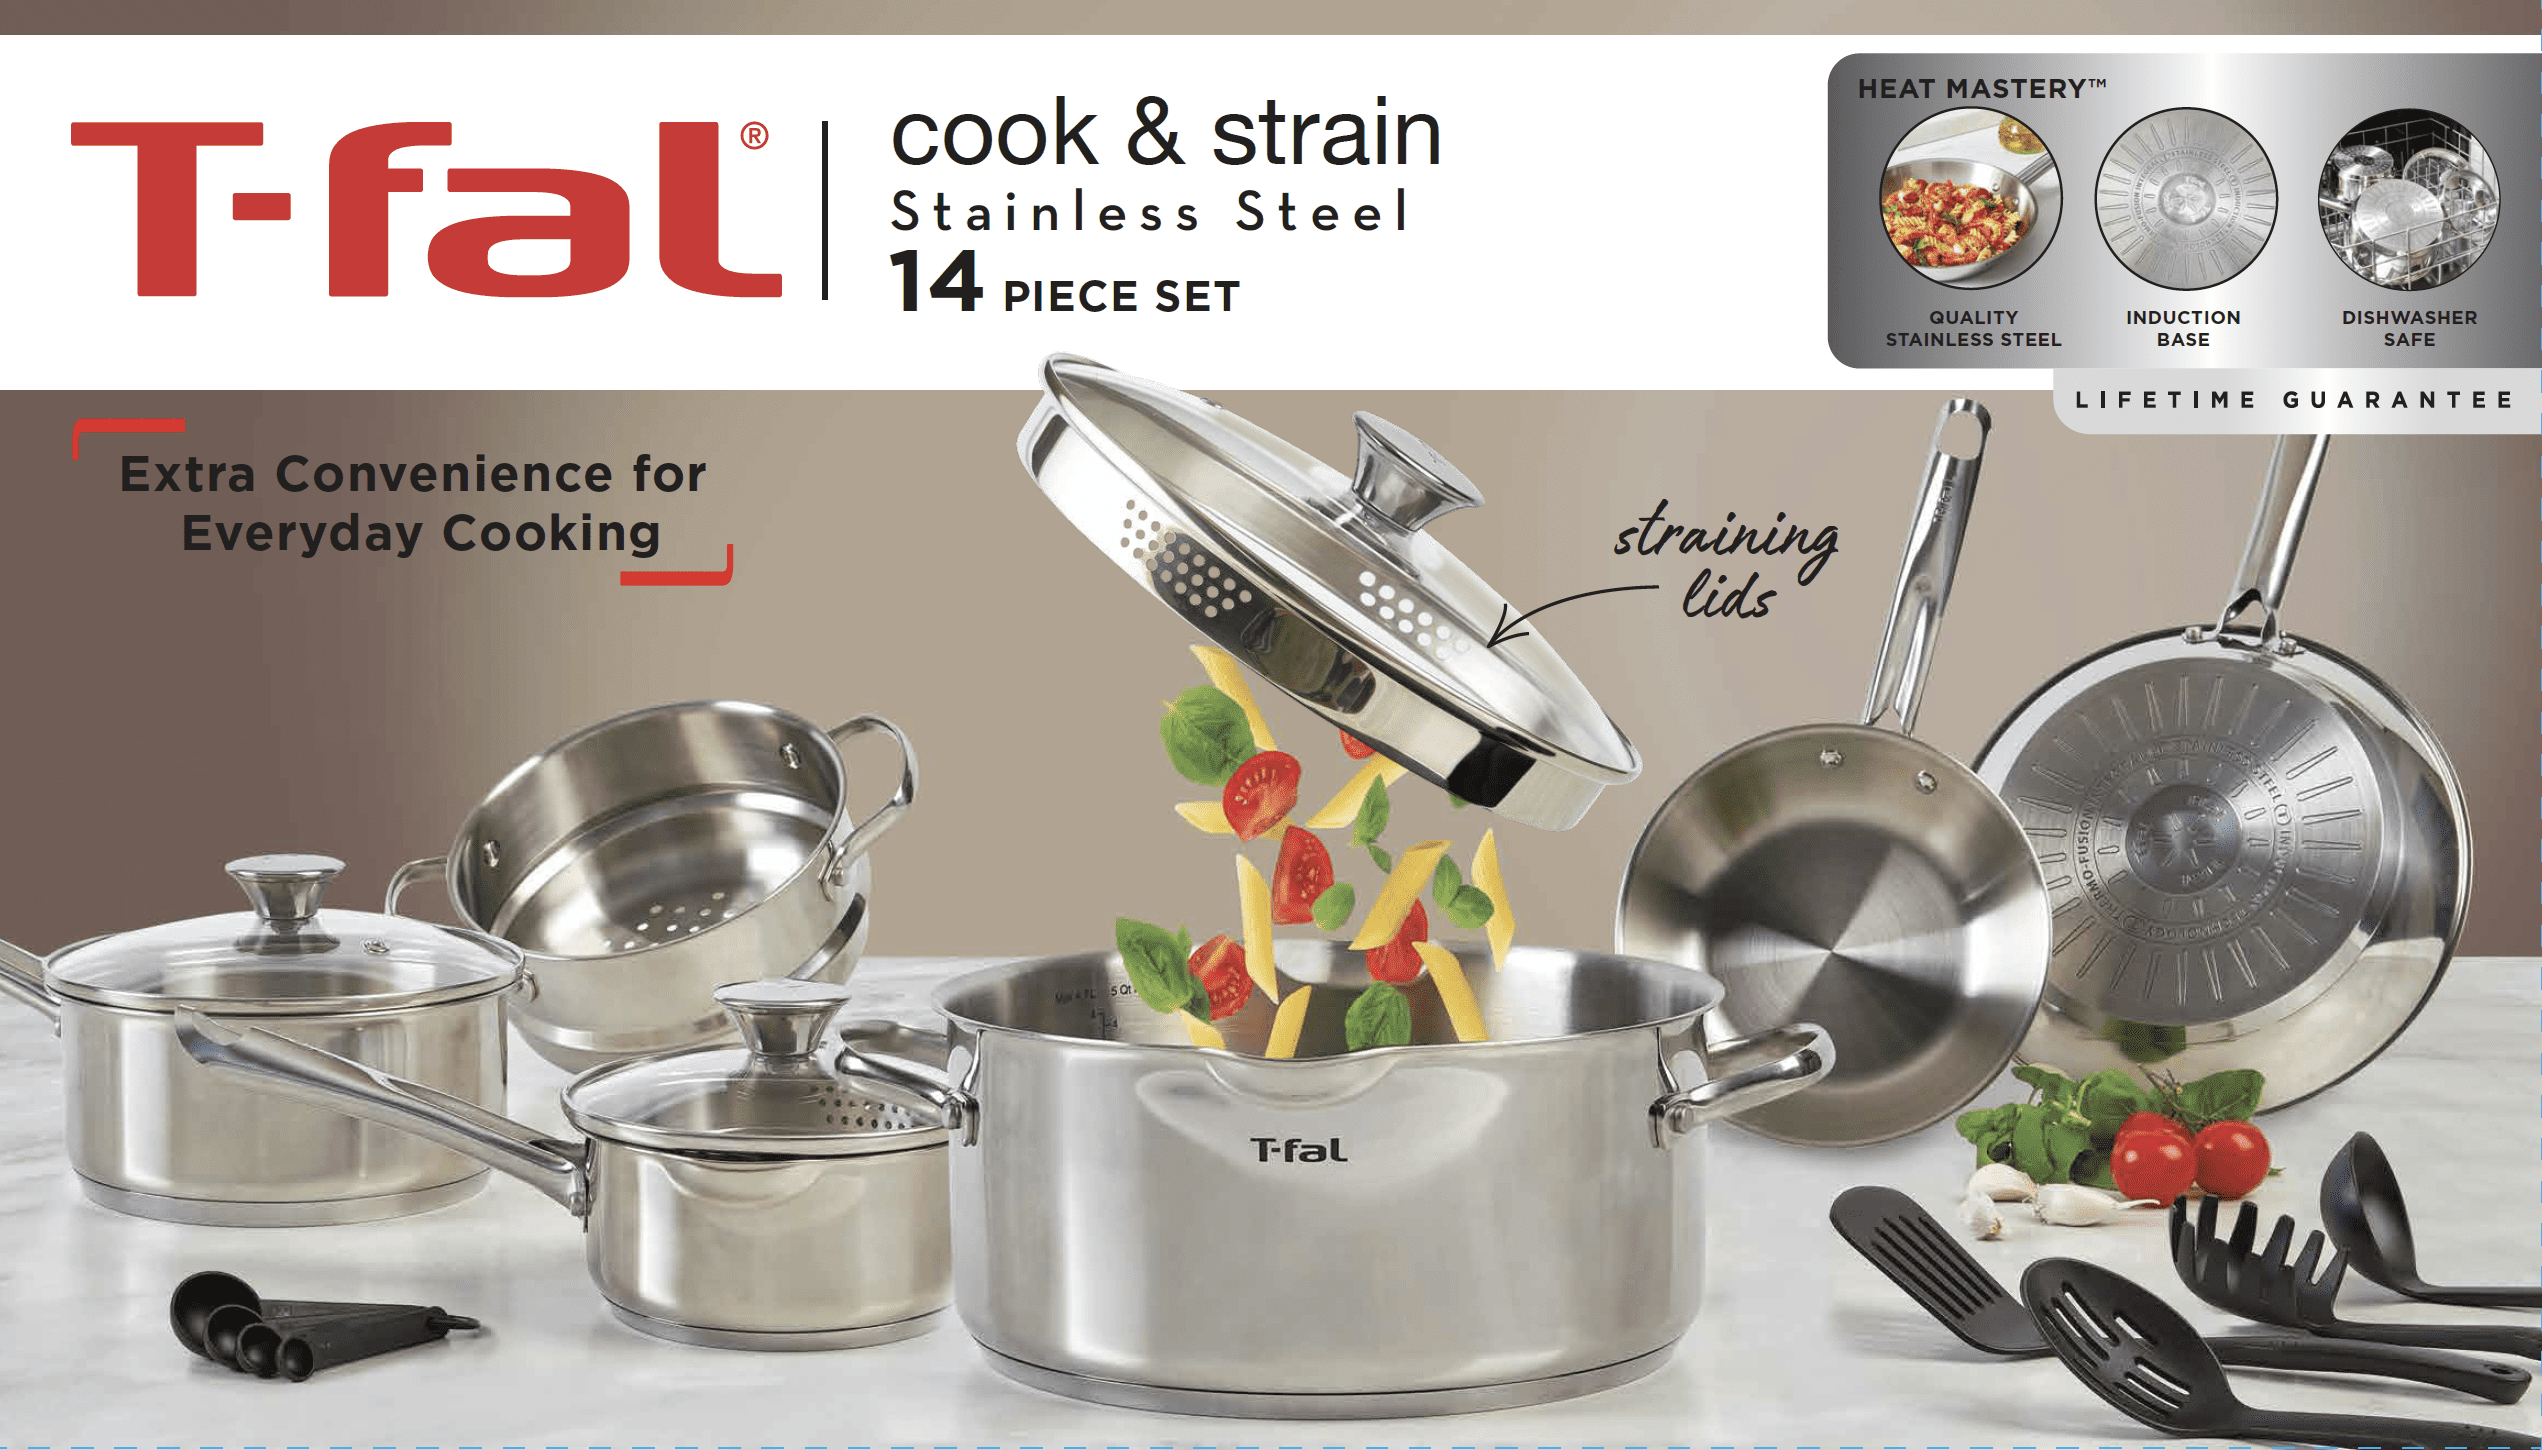 T-fal Platinum Endurance 14pc Stainless Steel Cookware Set 32406067264